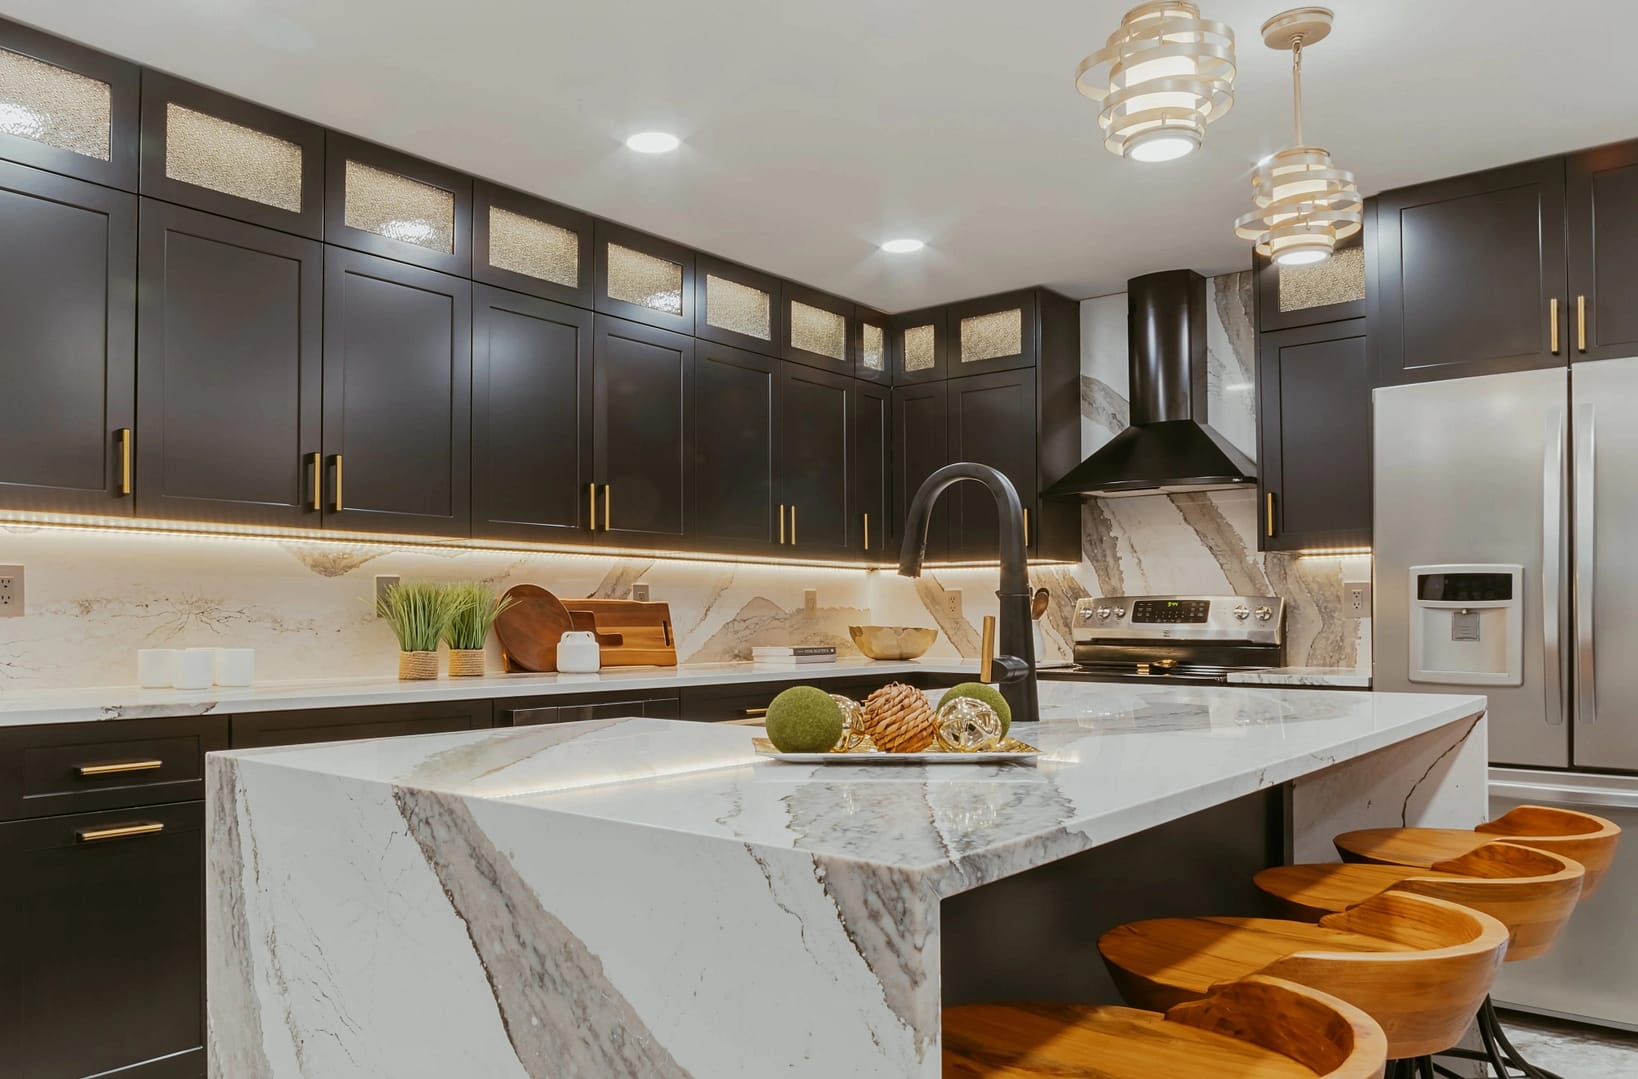 Cabinet Color Goes with Black Countertops